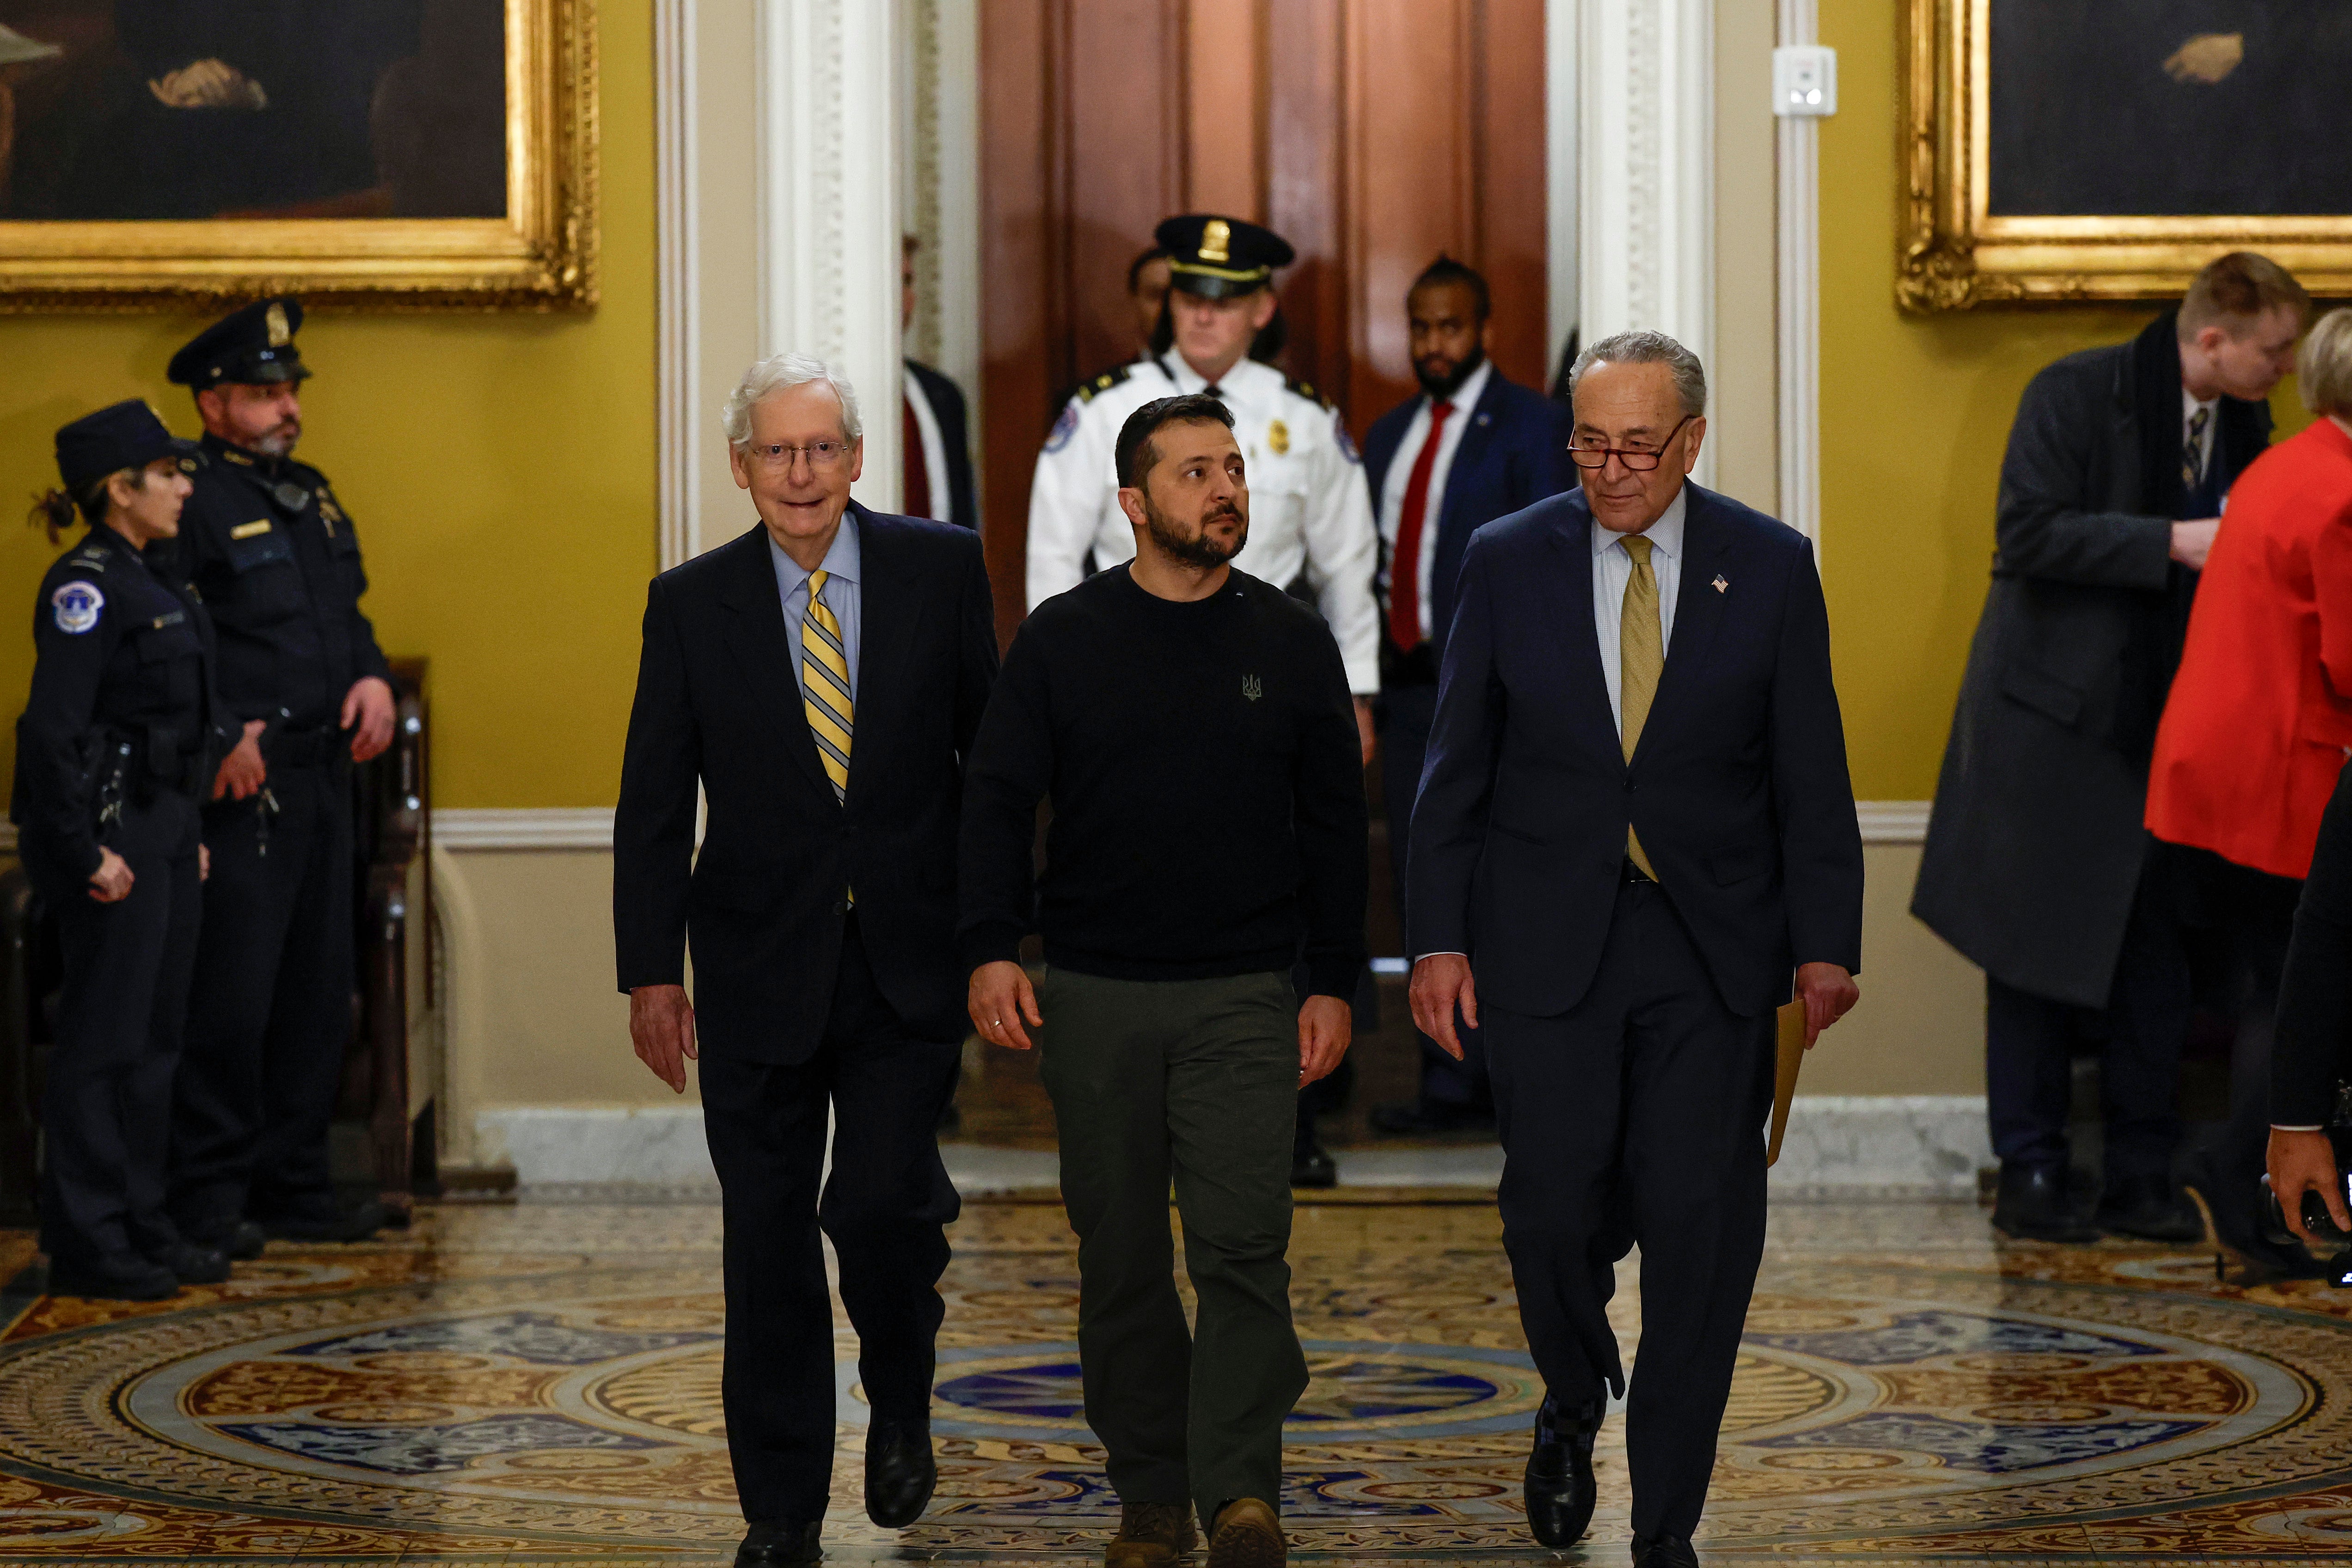 Senate Minority Leader Mitch McConnell (R-KY) (L) has been a major partner with Senate Majority Leader Charles Schumer (D-NY) in supporting Ukrainian President Volodymyr Zelensky (C) (Photo by Anna Moneymaker/Getty Images)